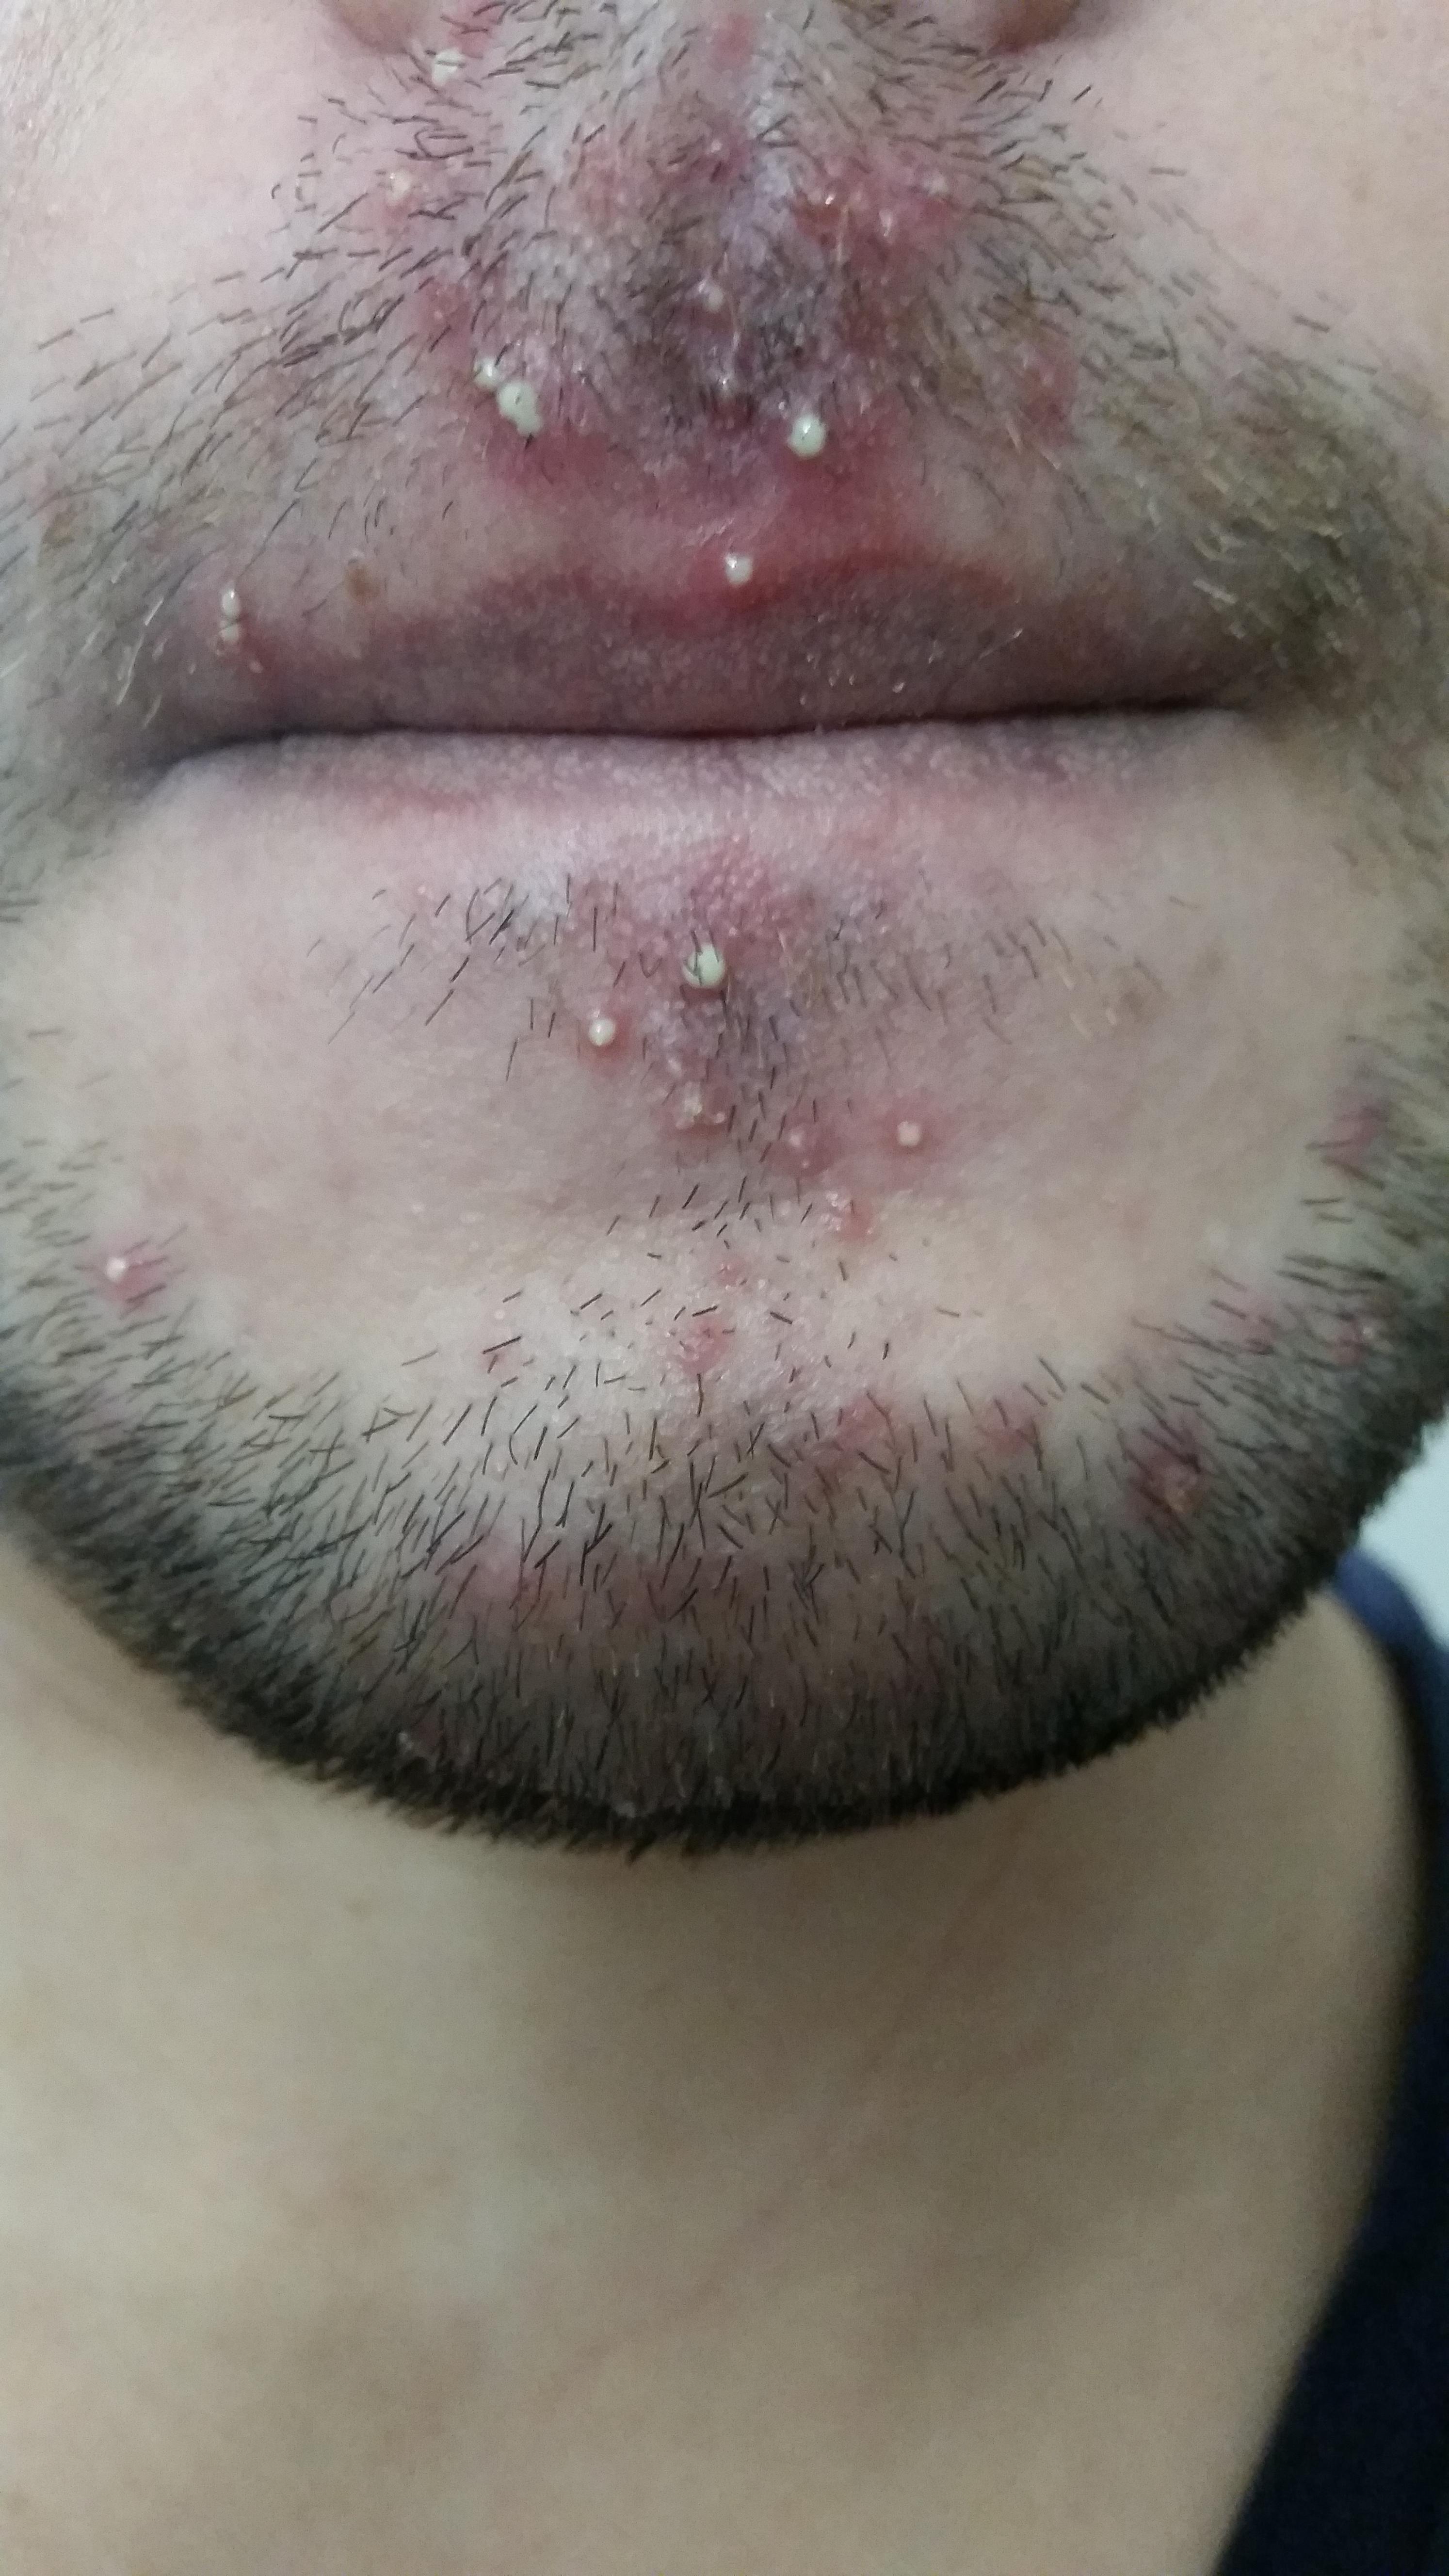 White Pus Zits Pimples Around Mouth And Chin Help Pics General